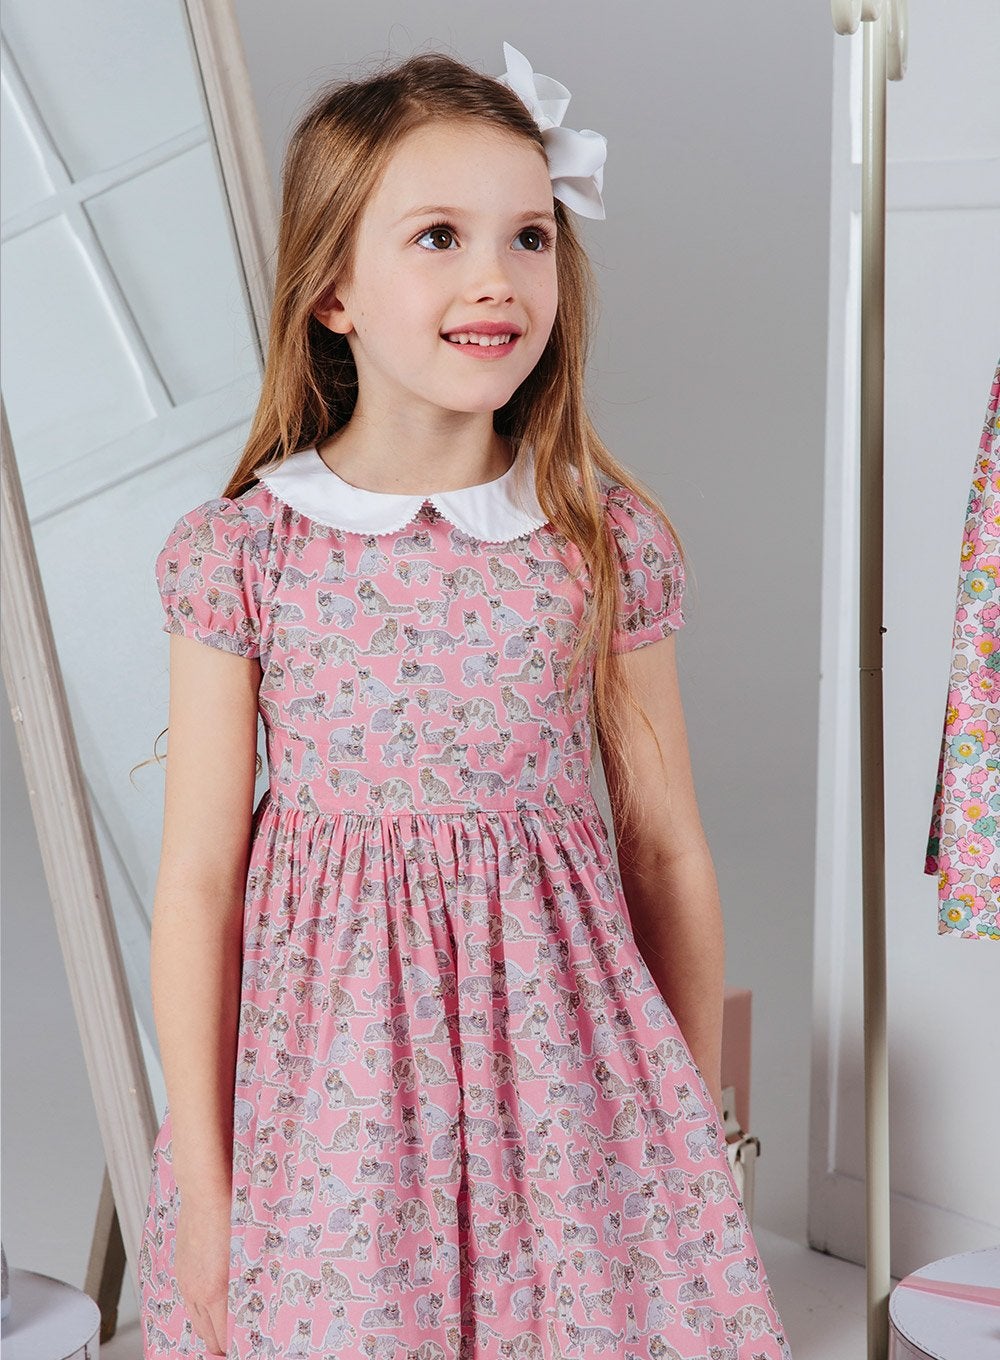 Lily Rose Dress Willoughby Party Dress - Trotters Childrenswear